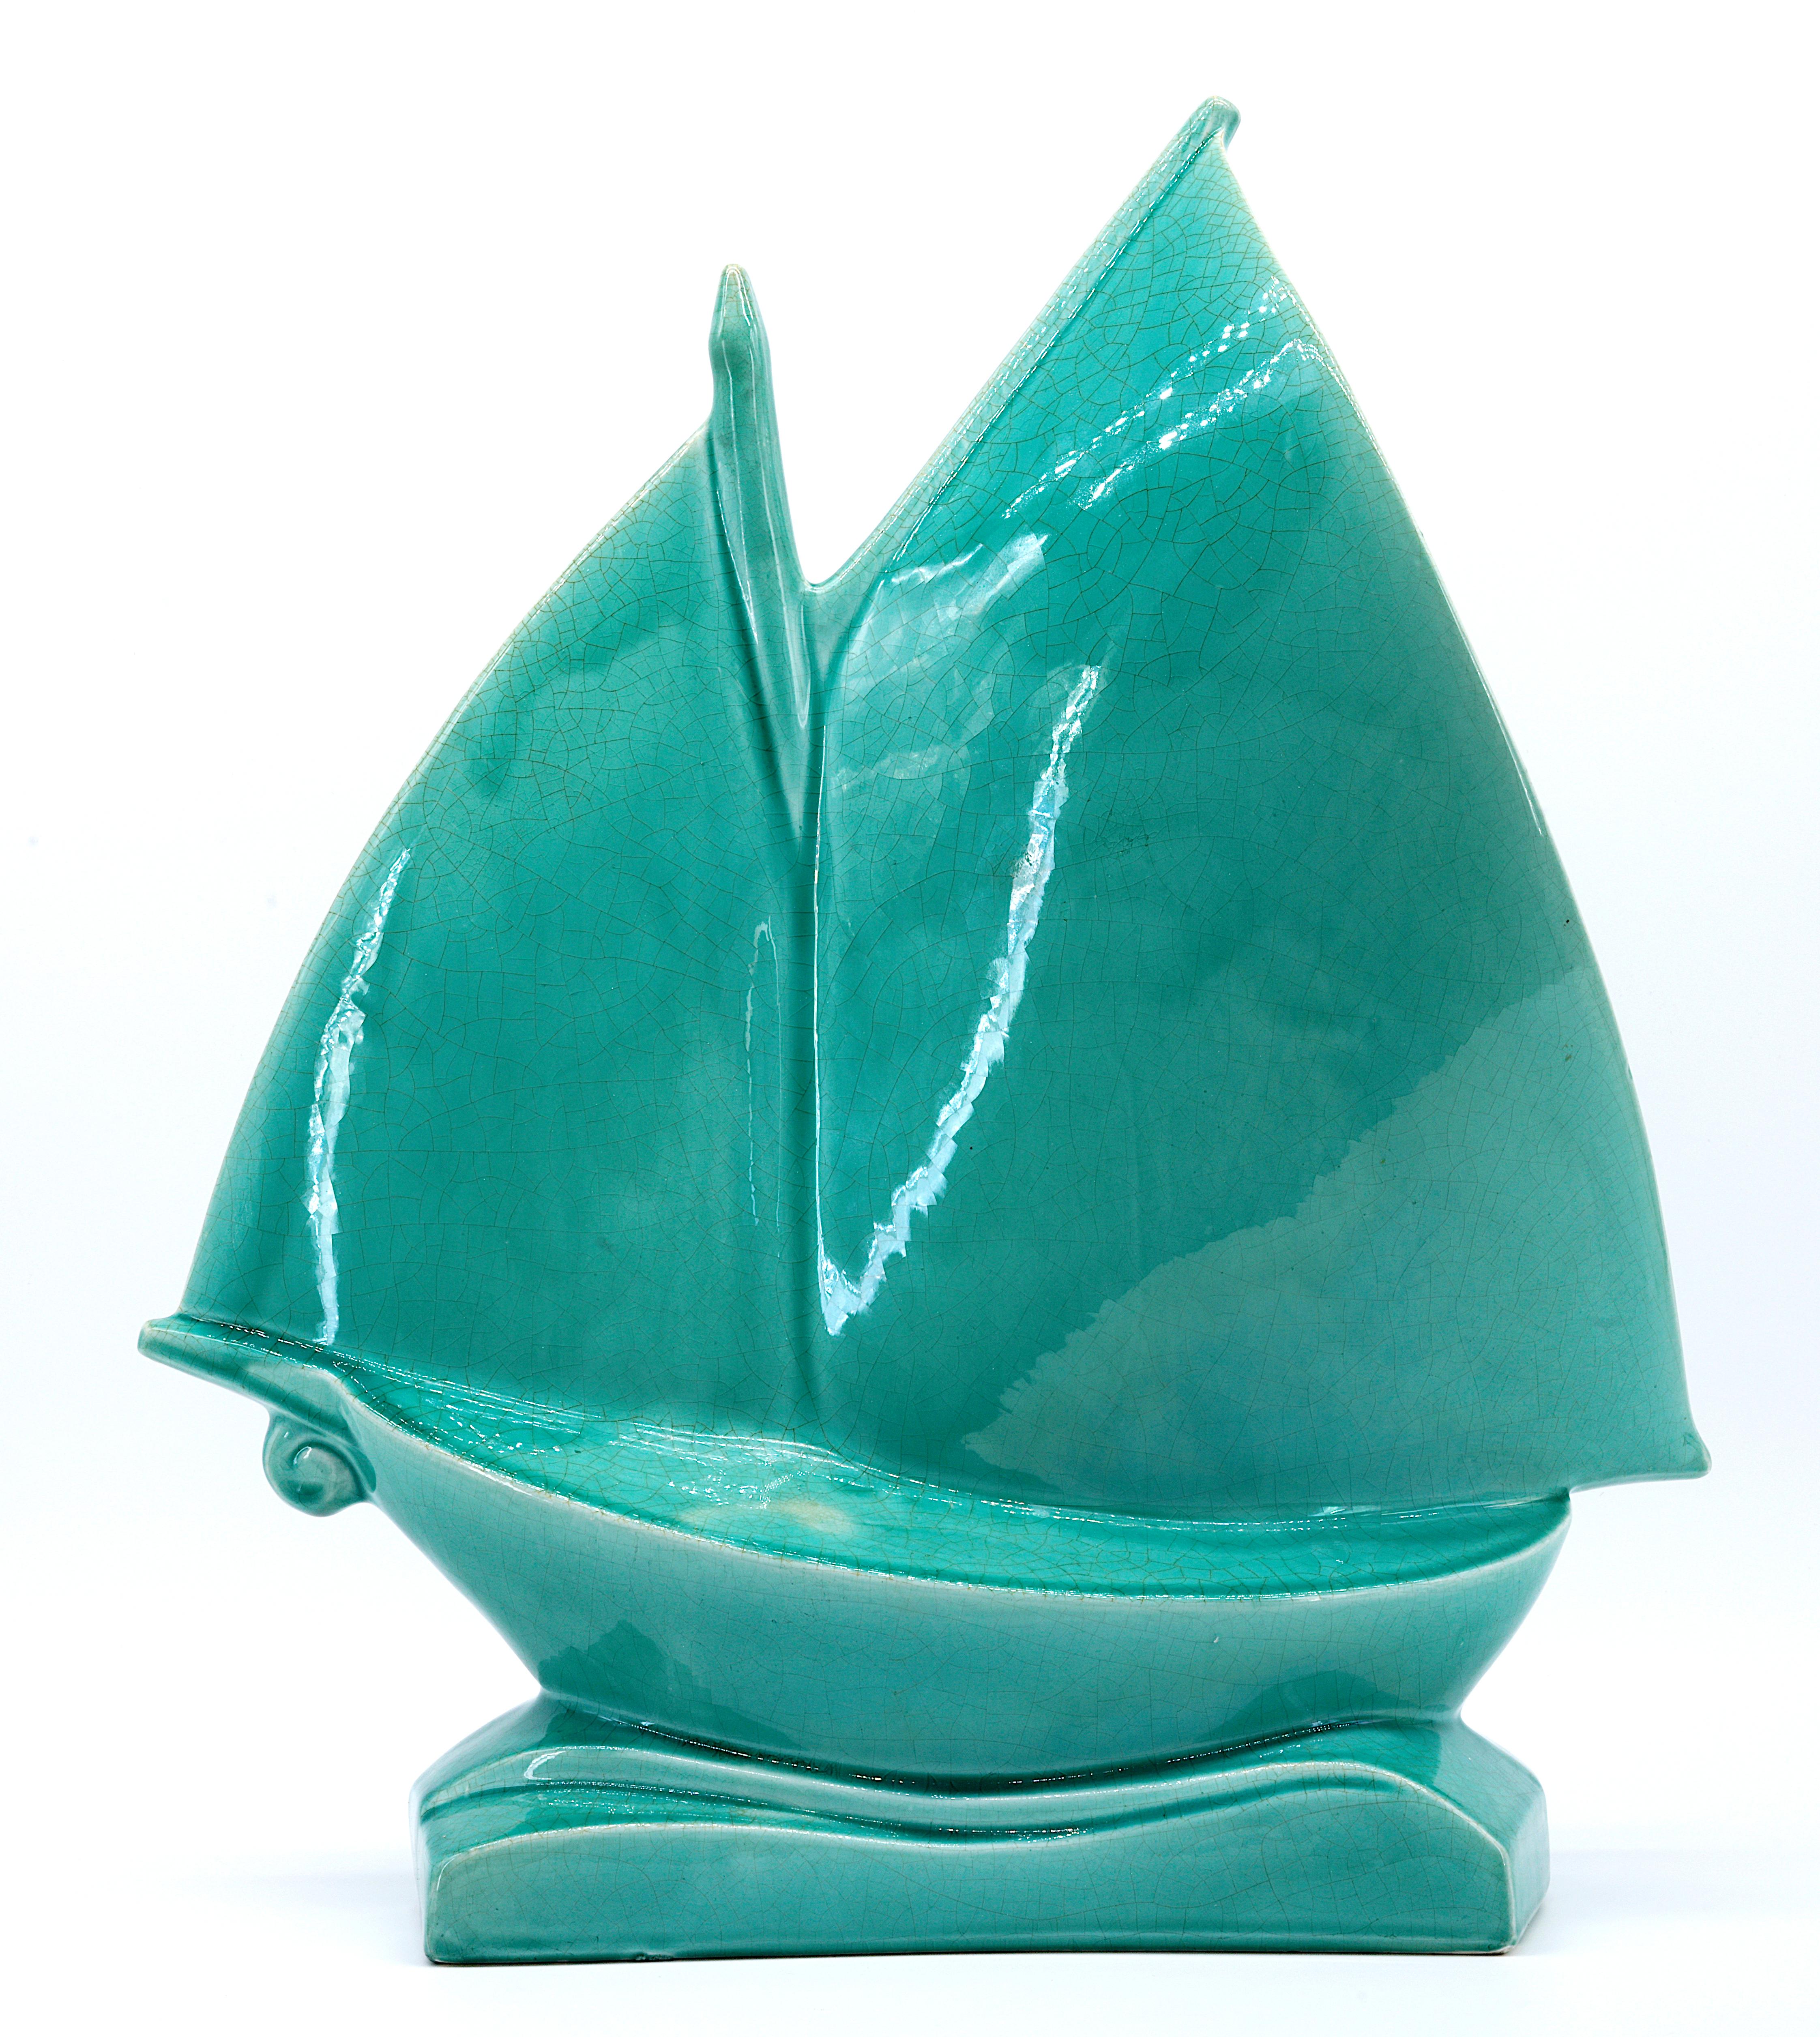 Early 20th Century Lejan Art Deco Crackle Glaze Ceramic Ship at Orchies's 1920s For Sale